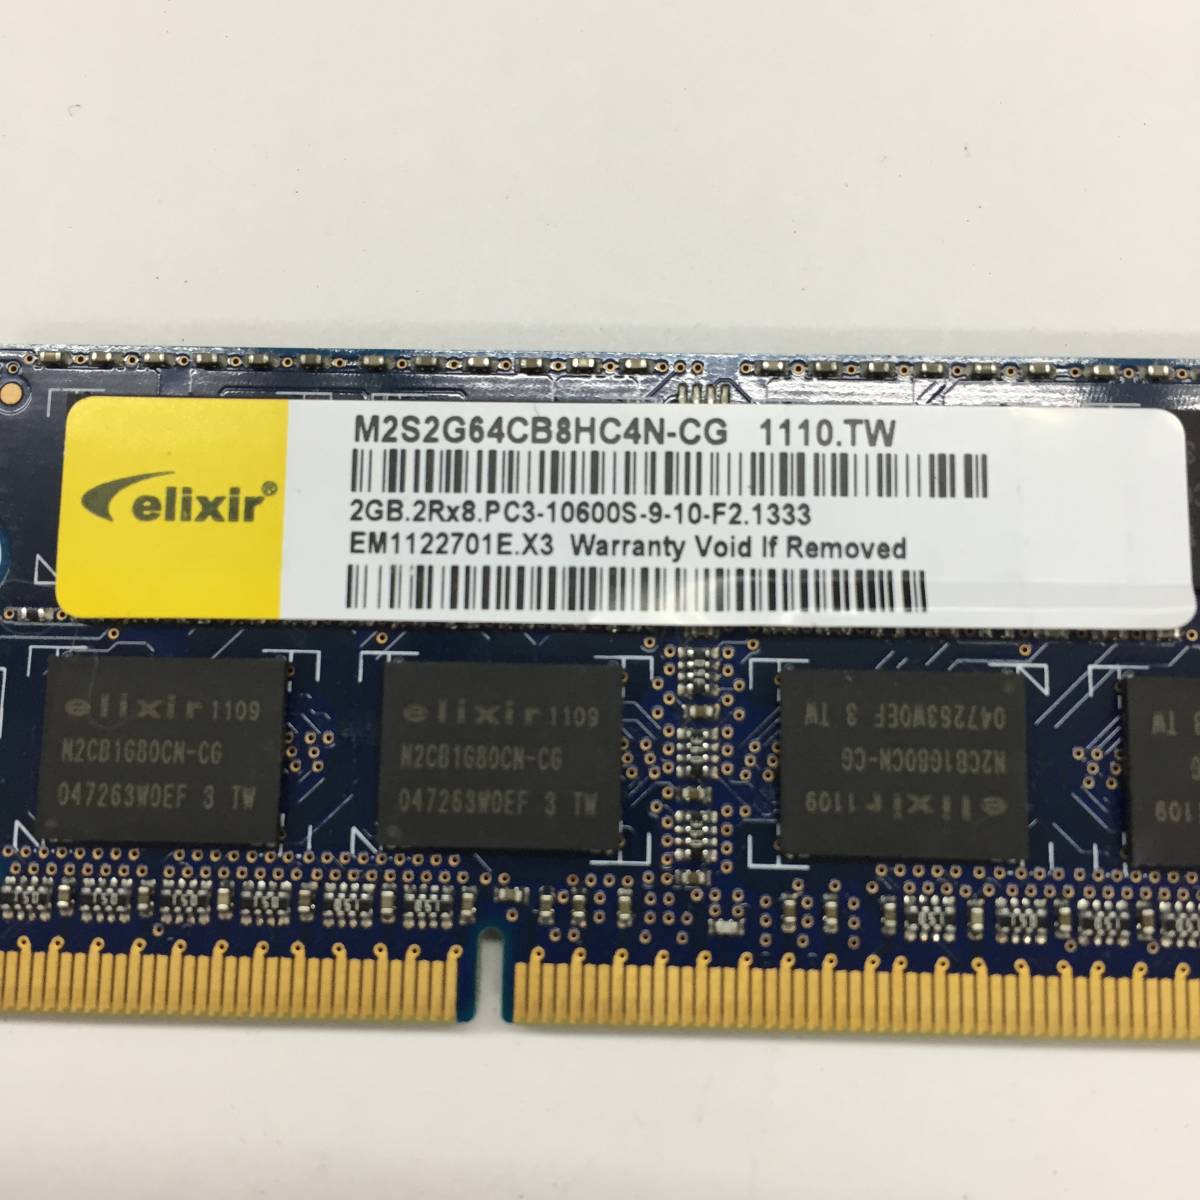 ^elixir PC3-10600S DDR3-1333 2GB×2 sheets ( total 4GB)